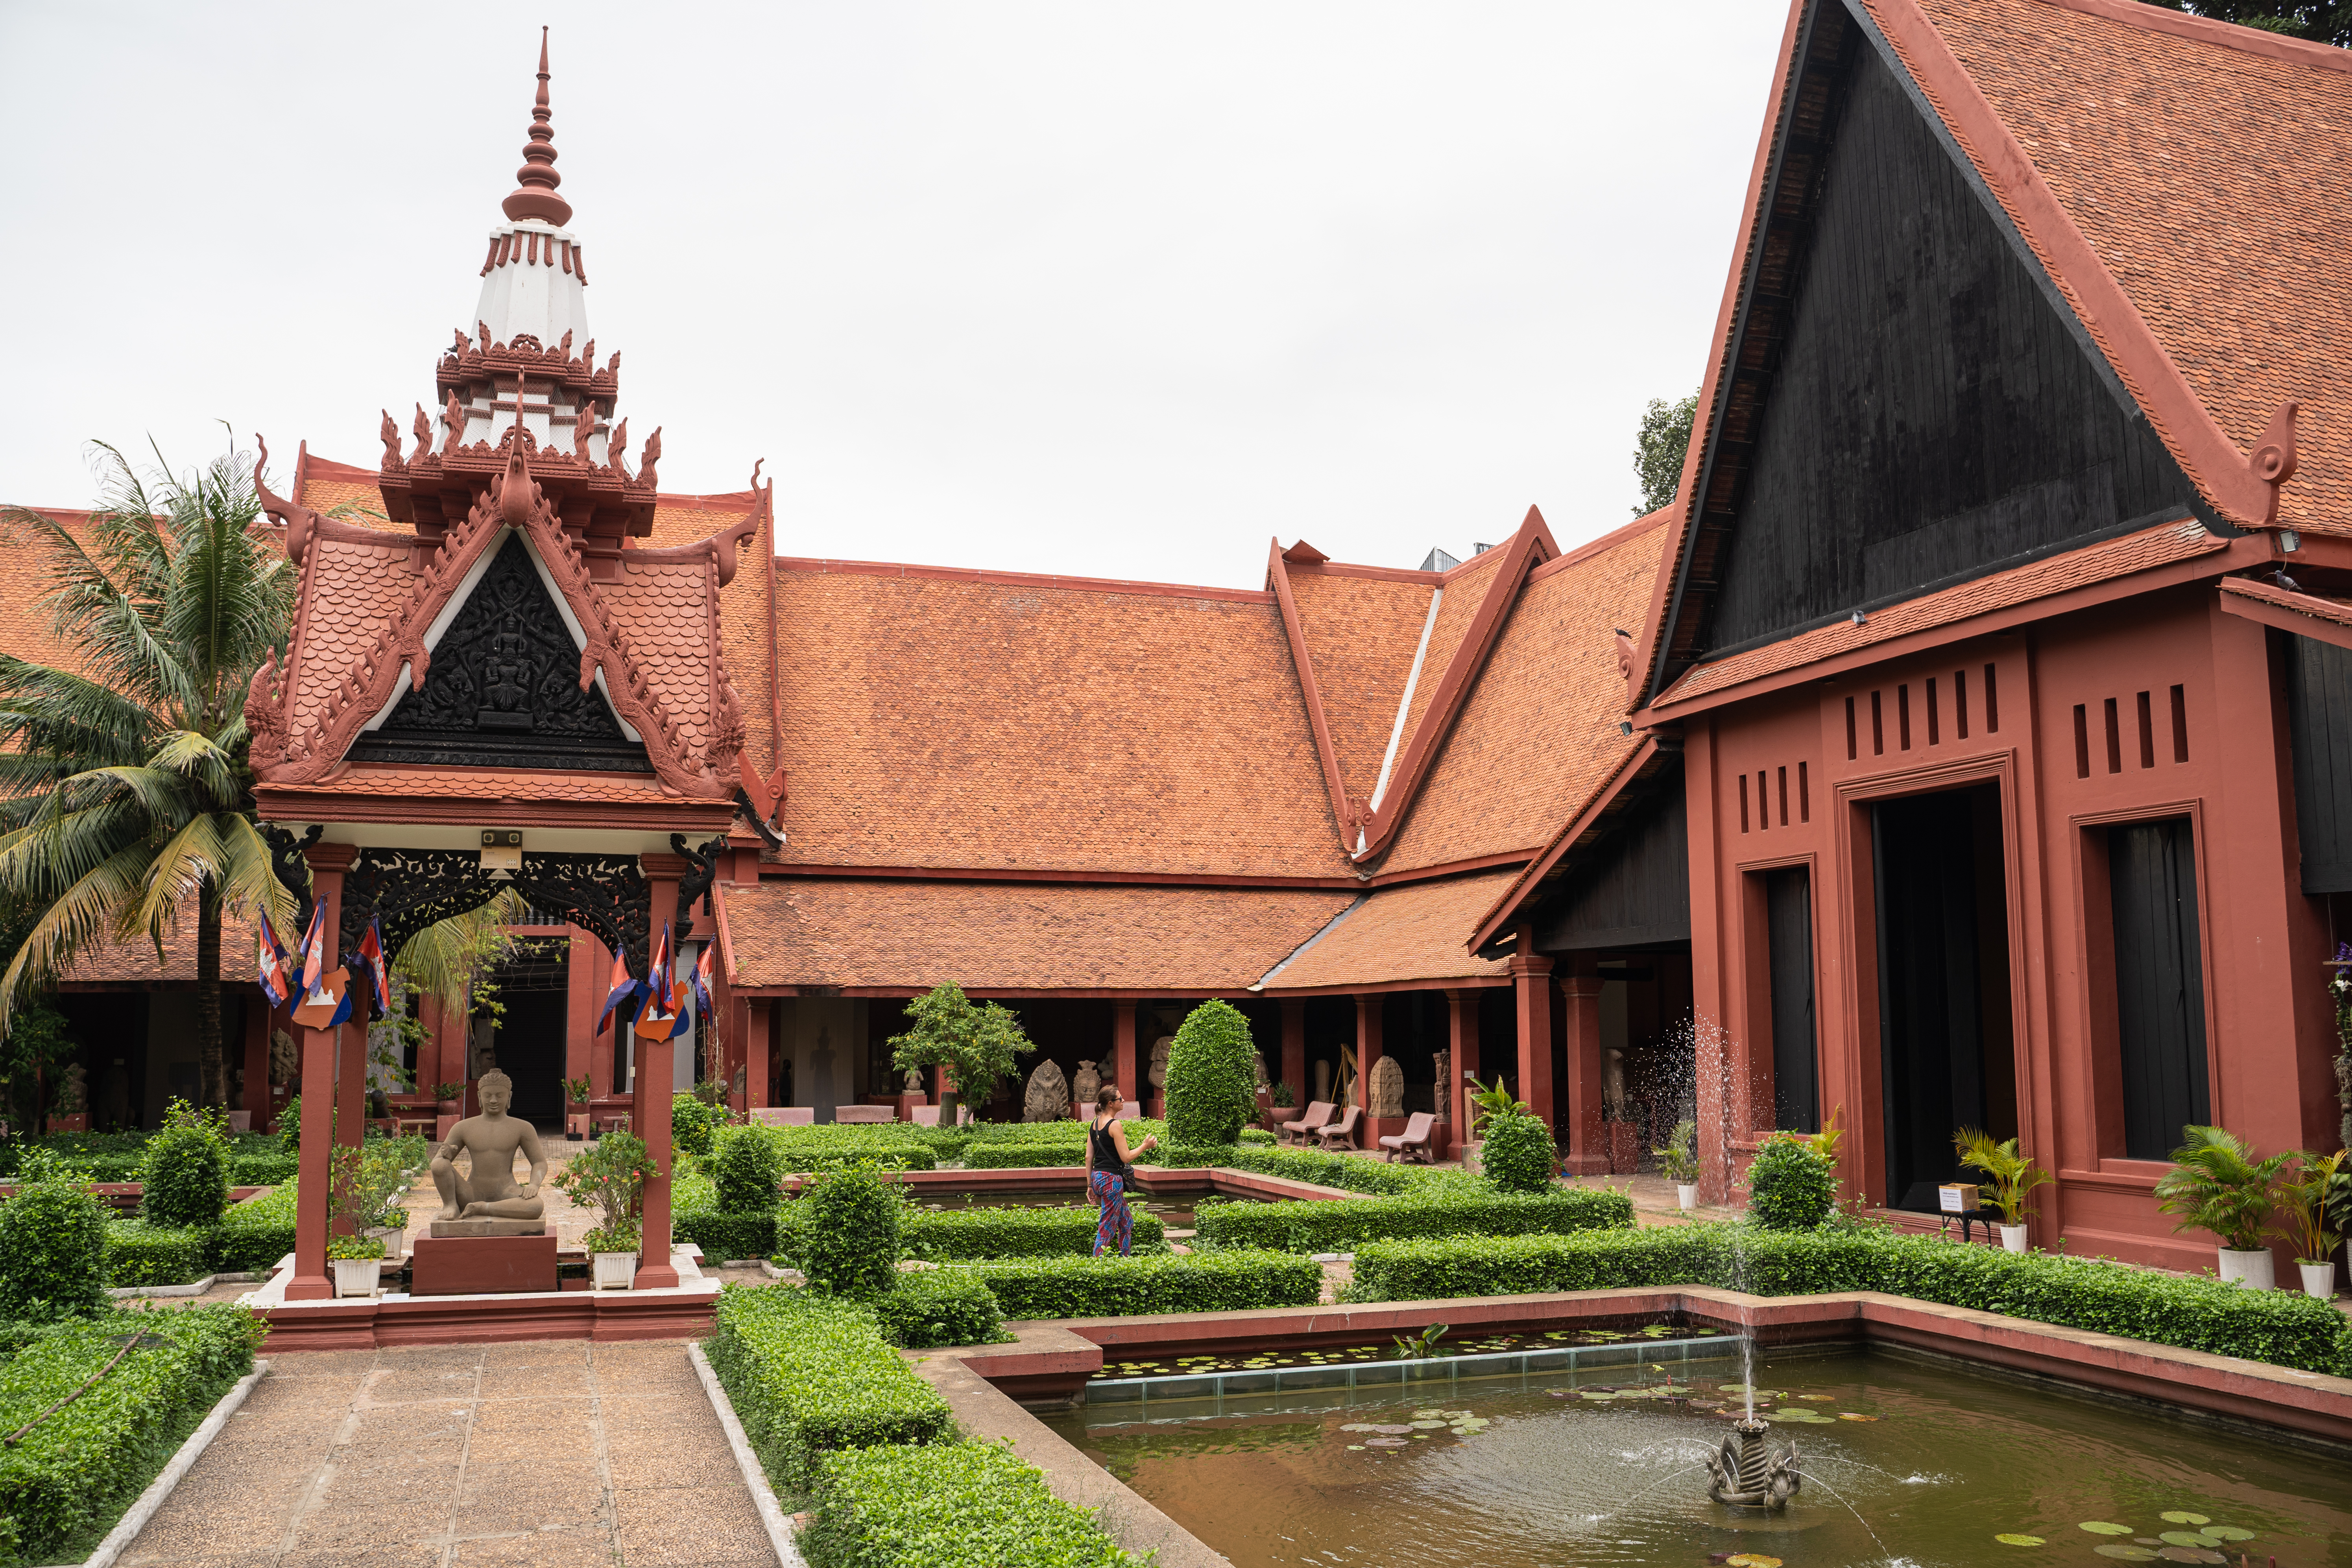 A visitor walks through the inner courtyard of the National Museum of Cambodia in Phnom Penh Aug. 8, 2022. (Photo by Cindy Liu/Special to The Denver Post)